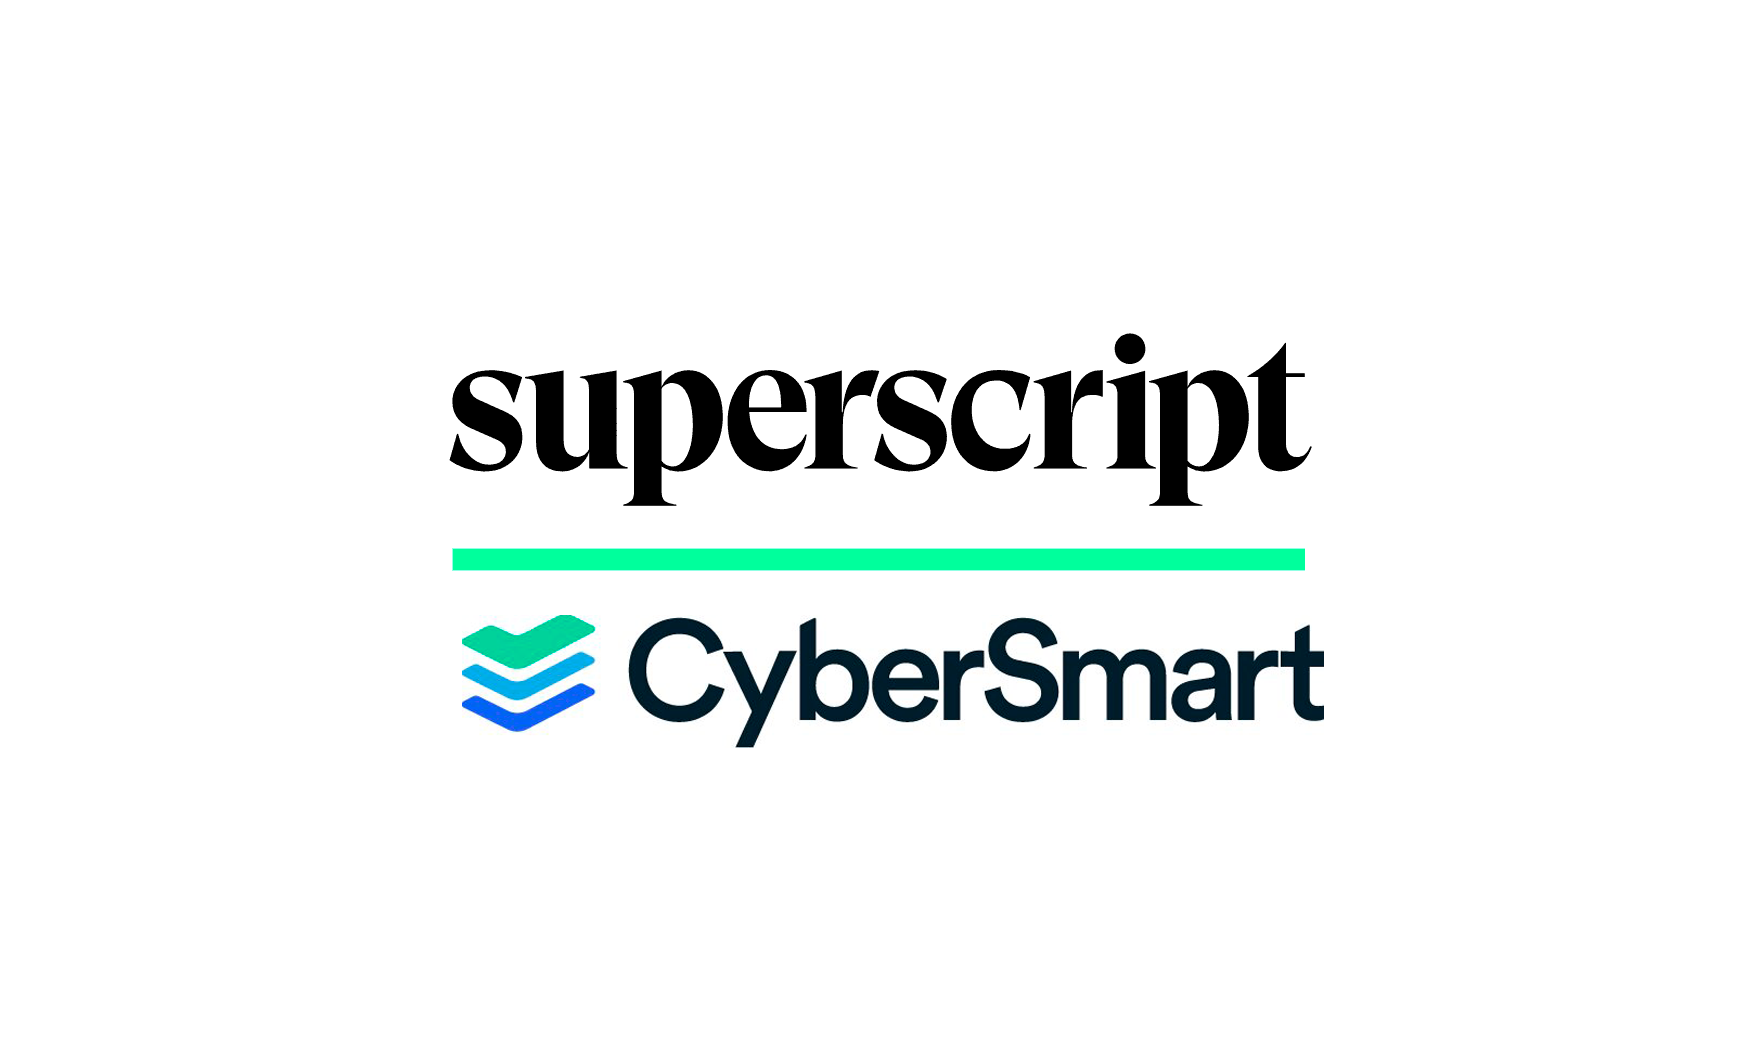 Superscript and CyberSmart Partner to Provide Embedded Cybersecurity Insurance